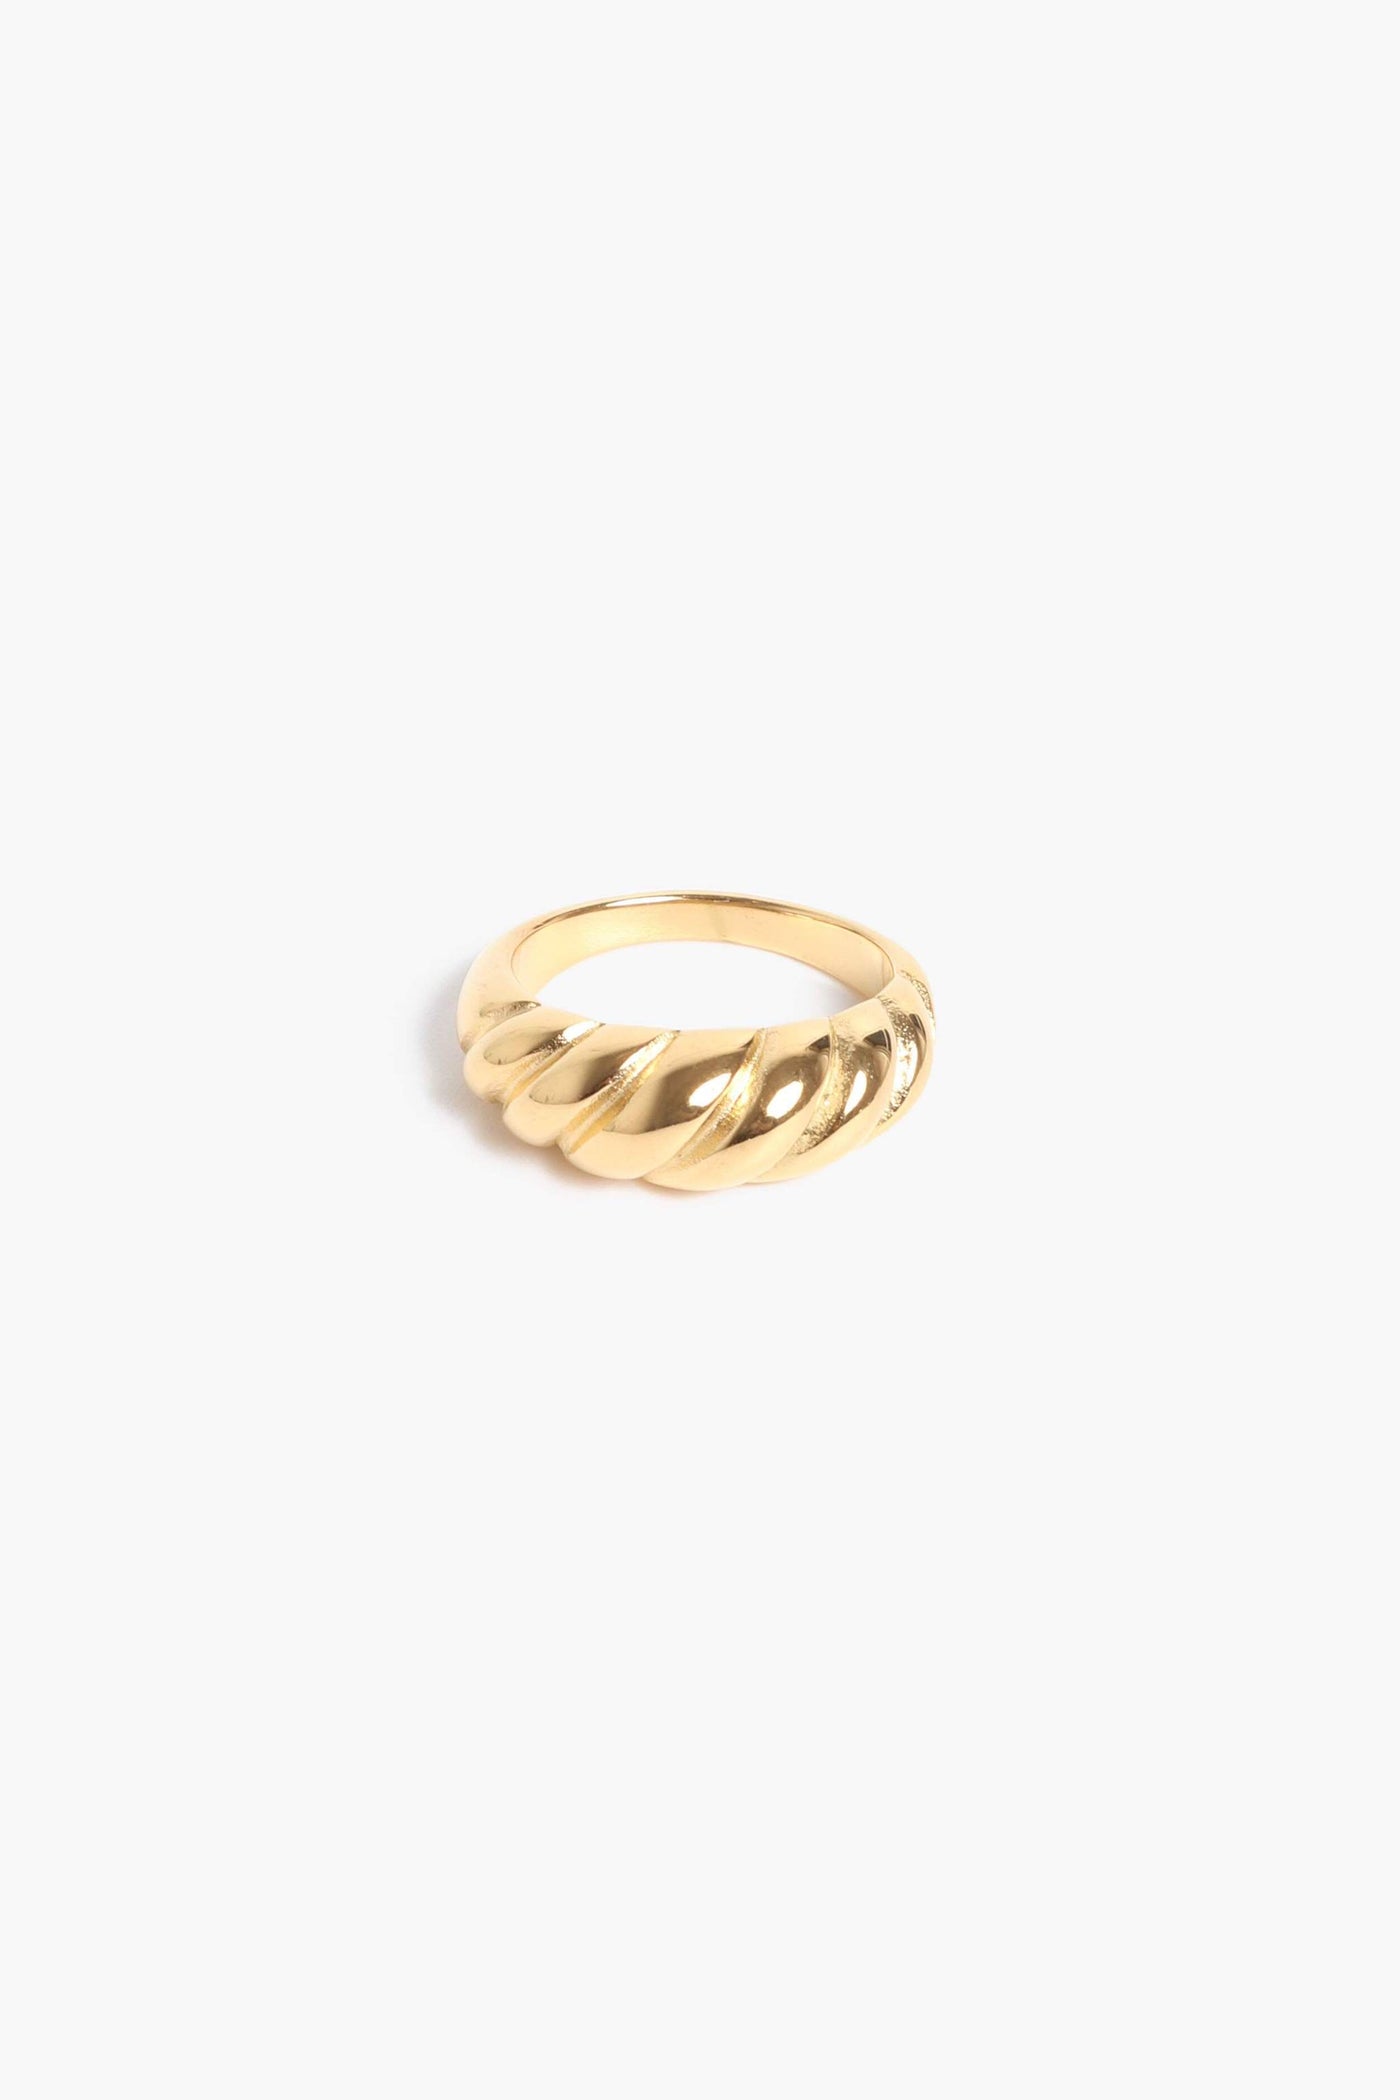 Marrin Costello Jewelry Rita Ring croissant crescent classic statement ring. Available in sizes 6, 7, 8. Waterproof, sustainable, hypoallergenic. 14k gold plated stainless steel.